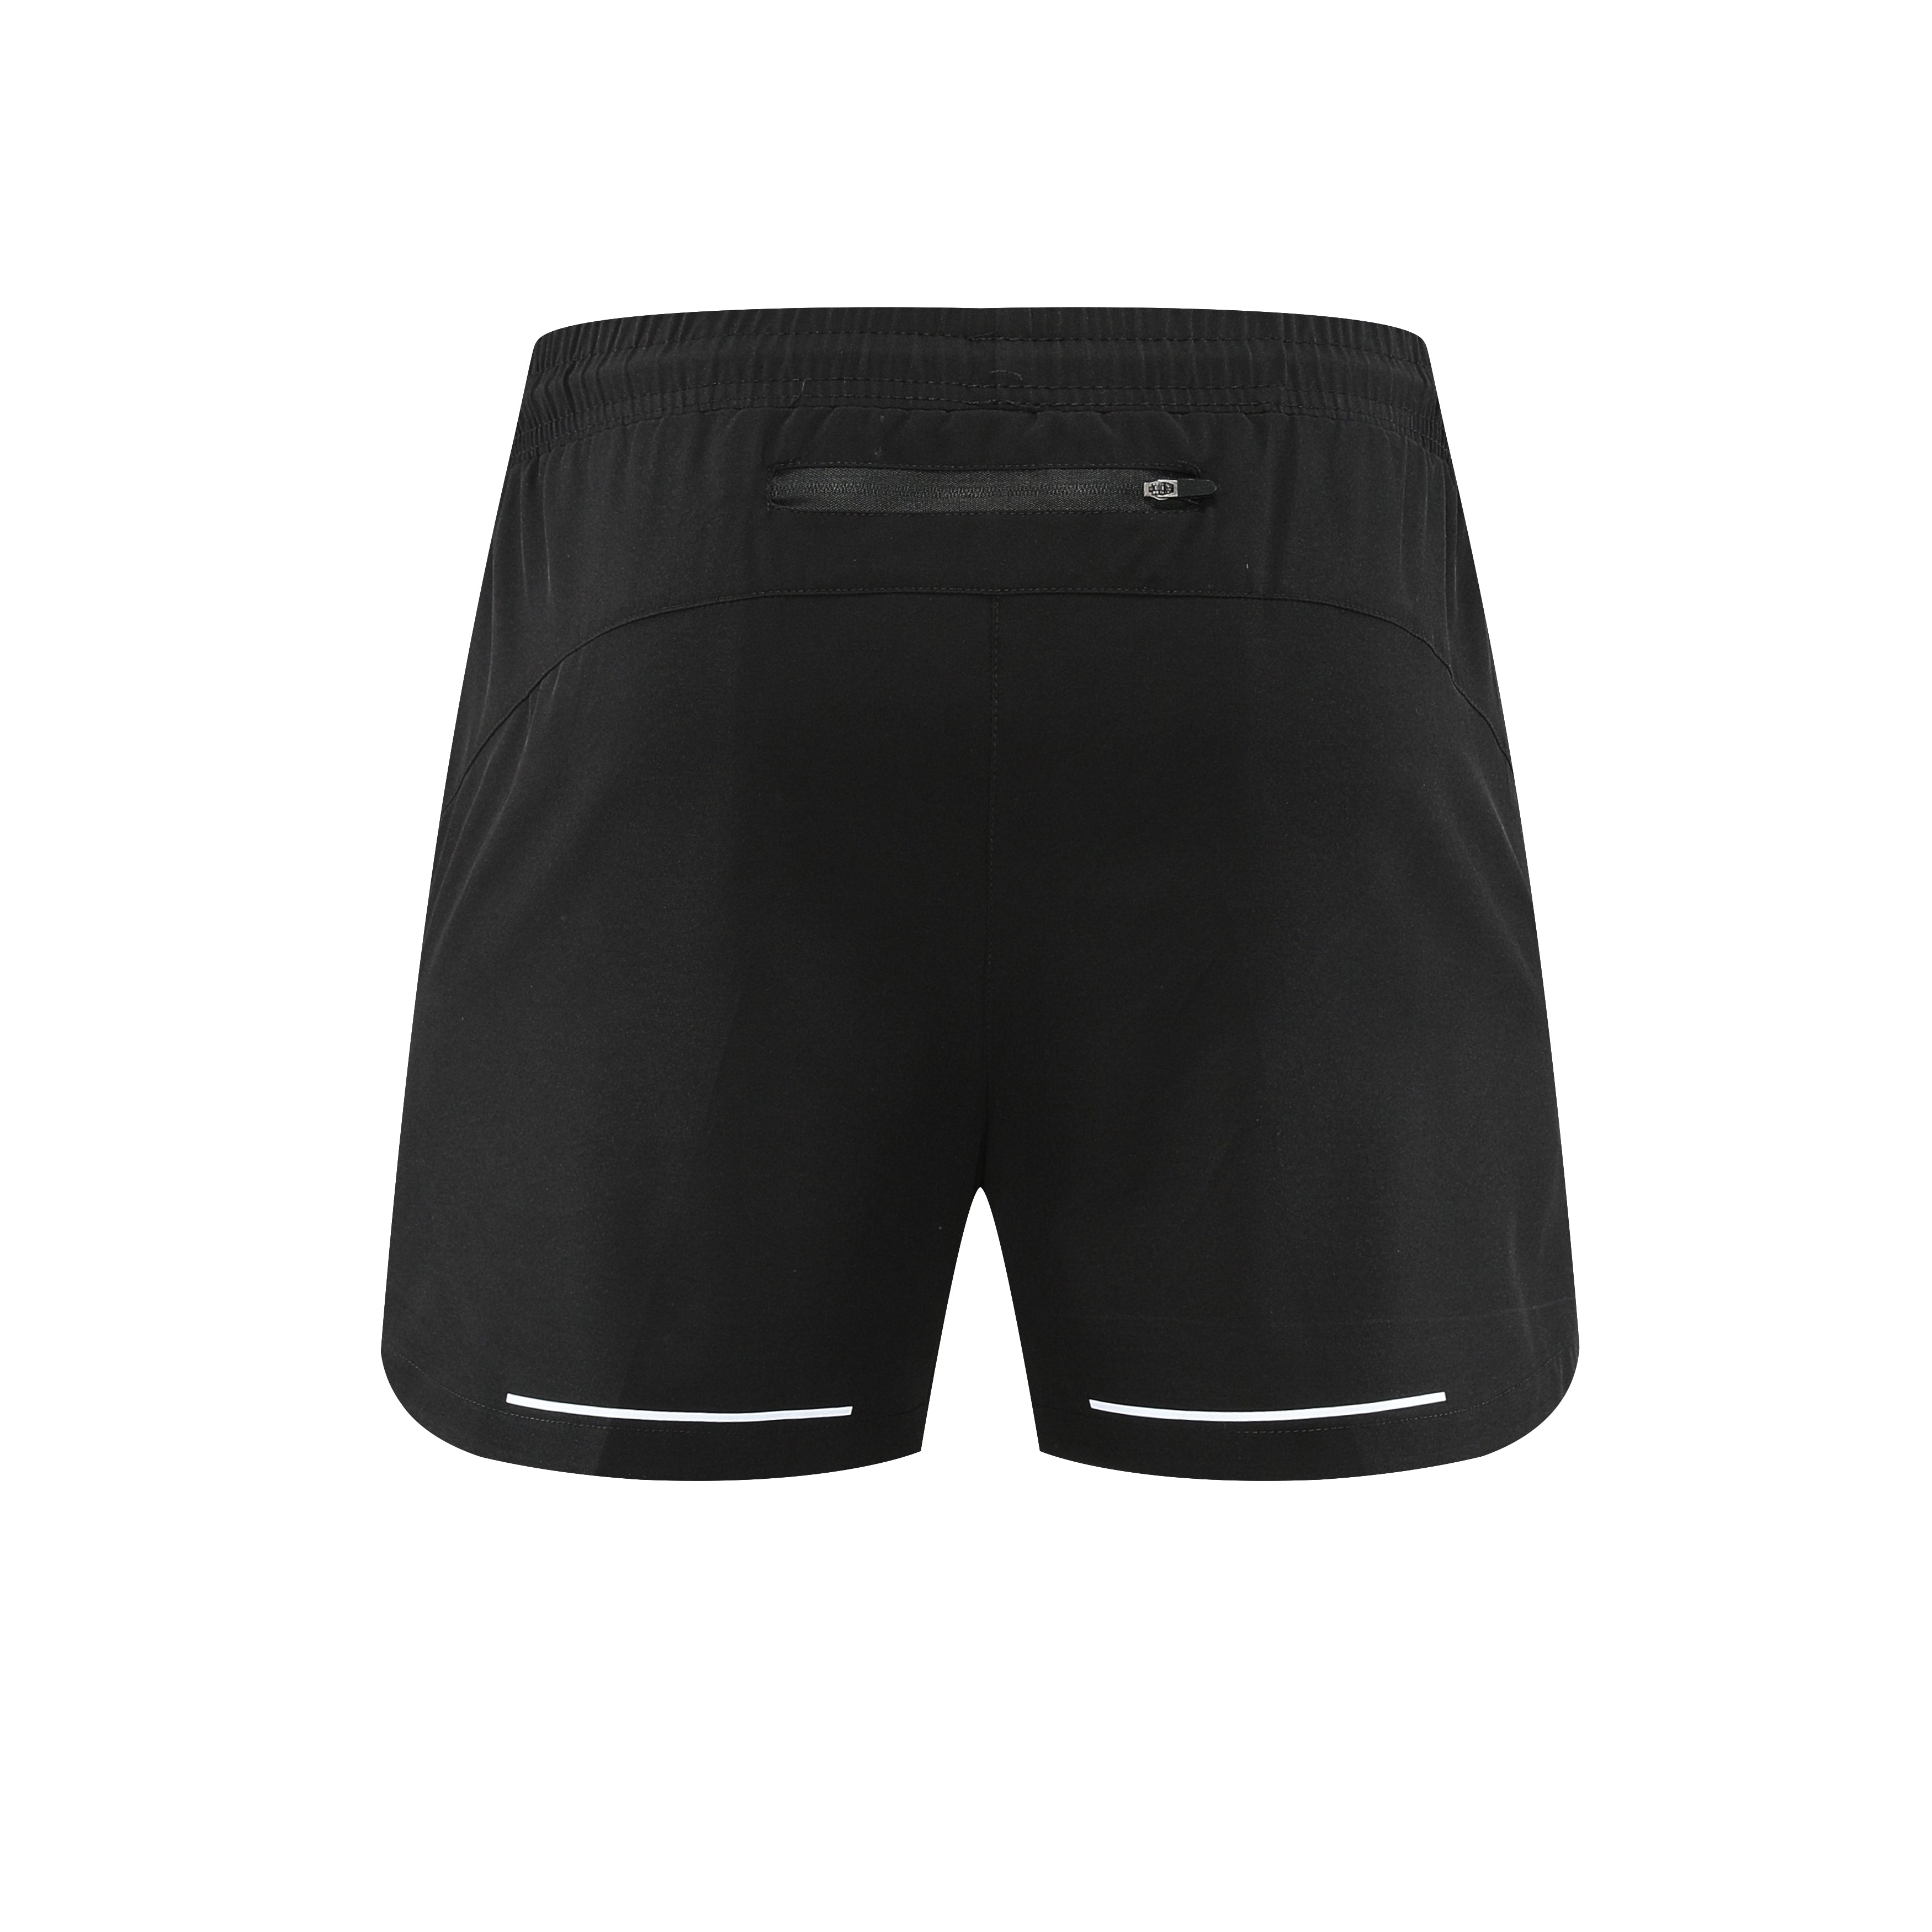 Body Building Graphic Shorts